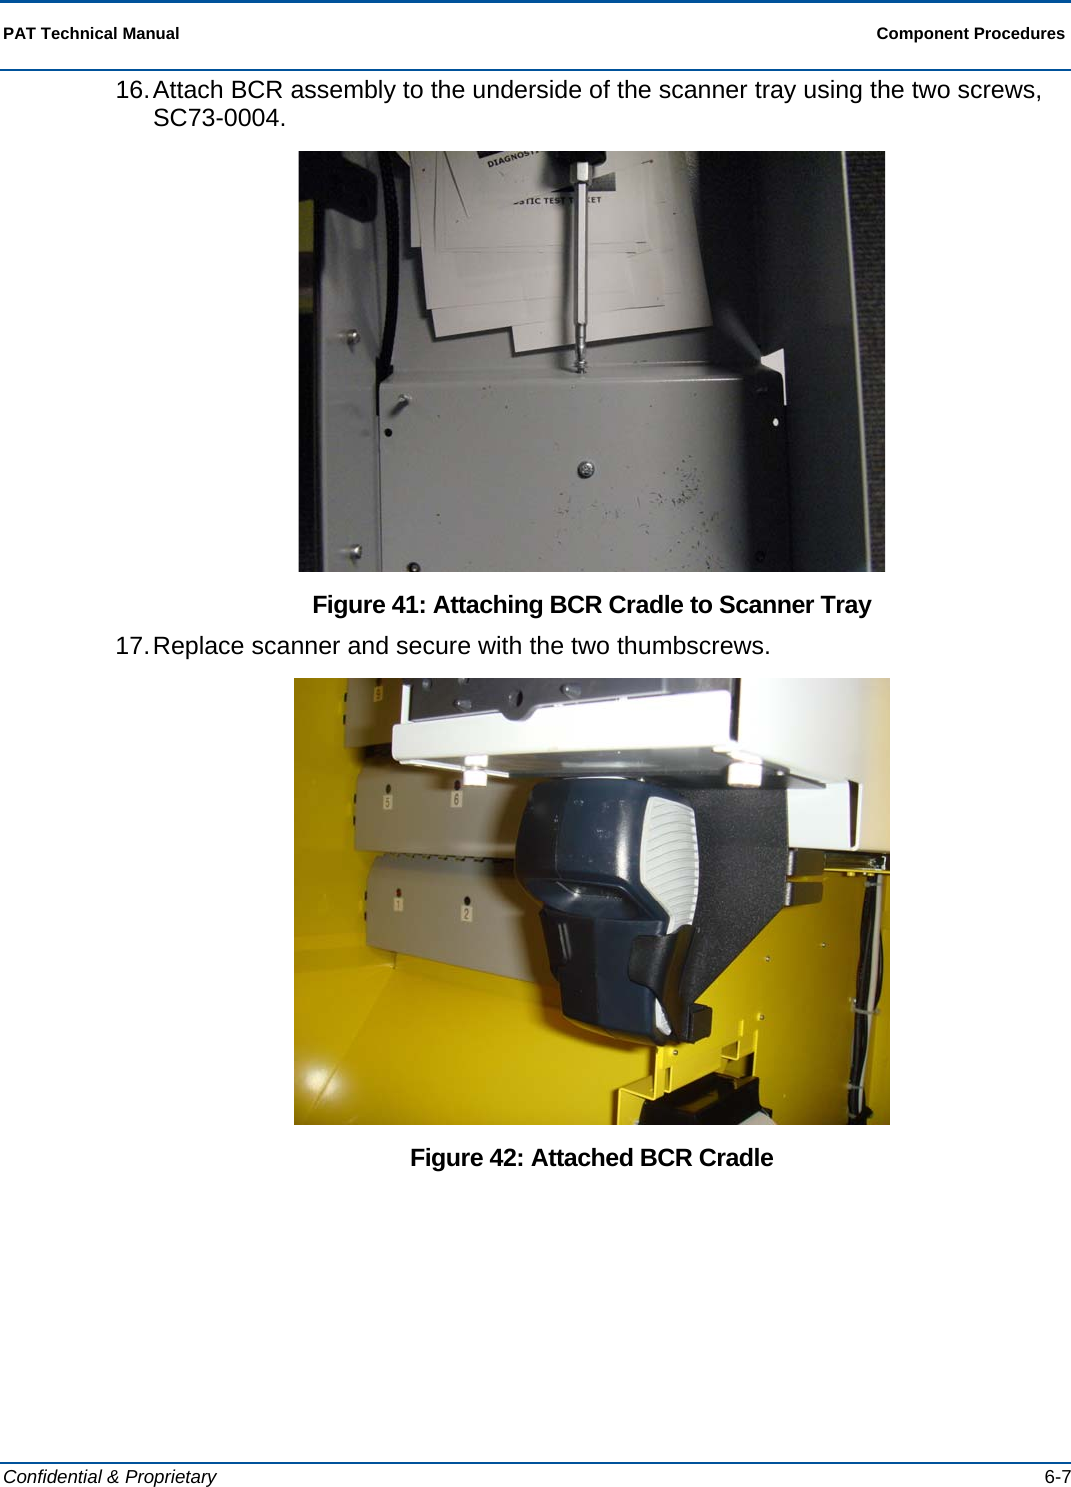  PAT Technical Manual  Component Procedures  Confidential &amp; Proprietary   6-7 16. Attach BCR assembly to the underside of the scanner tray using the two screws, SC73-0004.  Figure 41: Attaching BCR Cradle to Scanner Tray 17. Replace scanner and secure with the two thumbscrews.  Figure 42: Attached BCR Cradle 